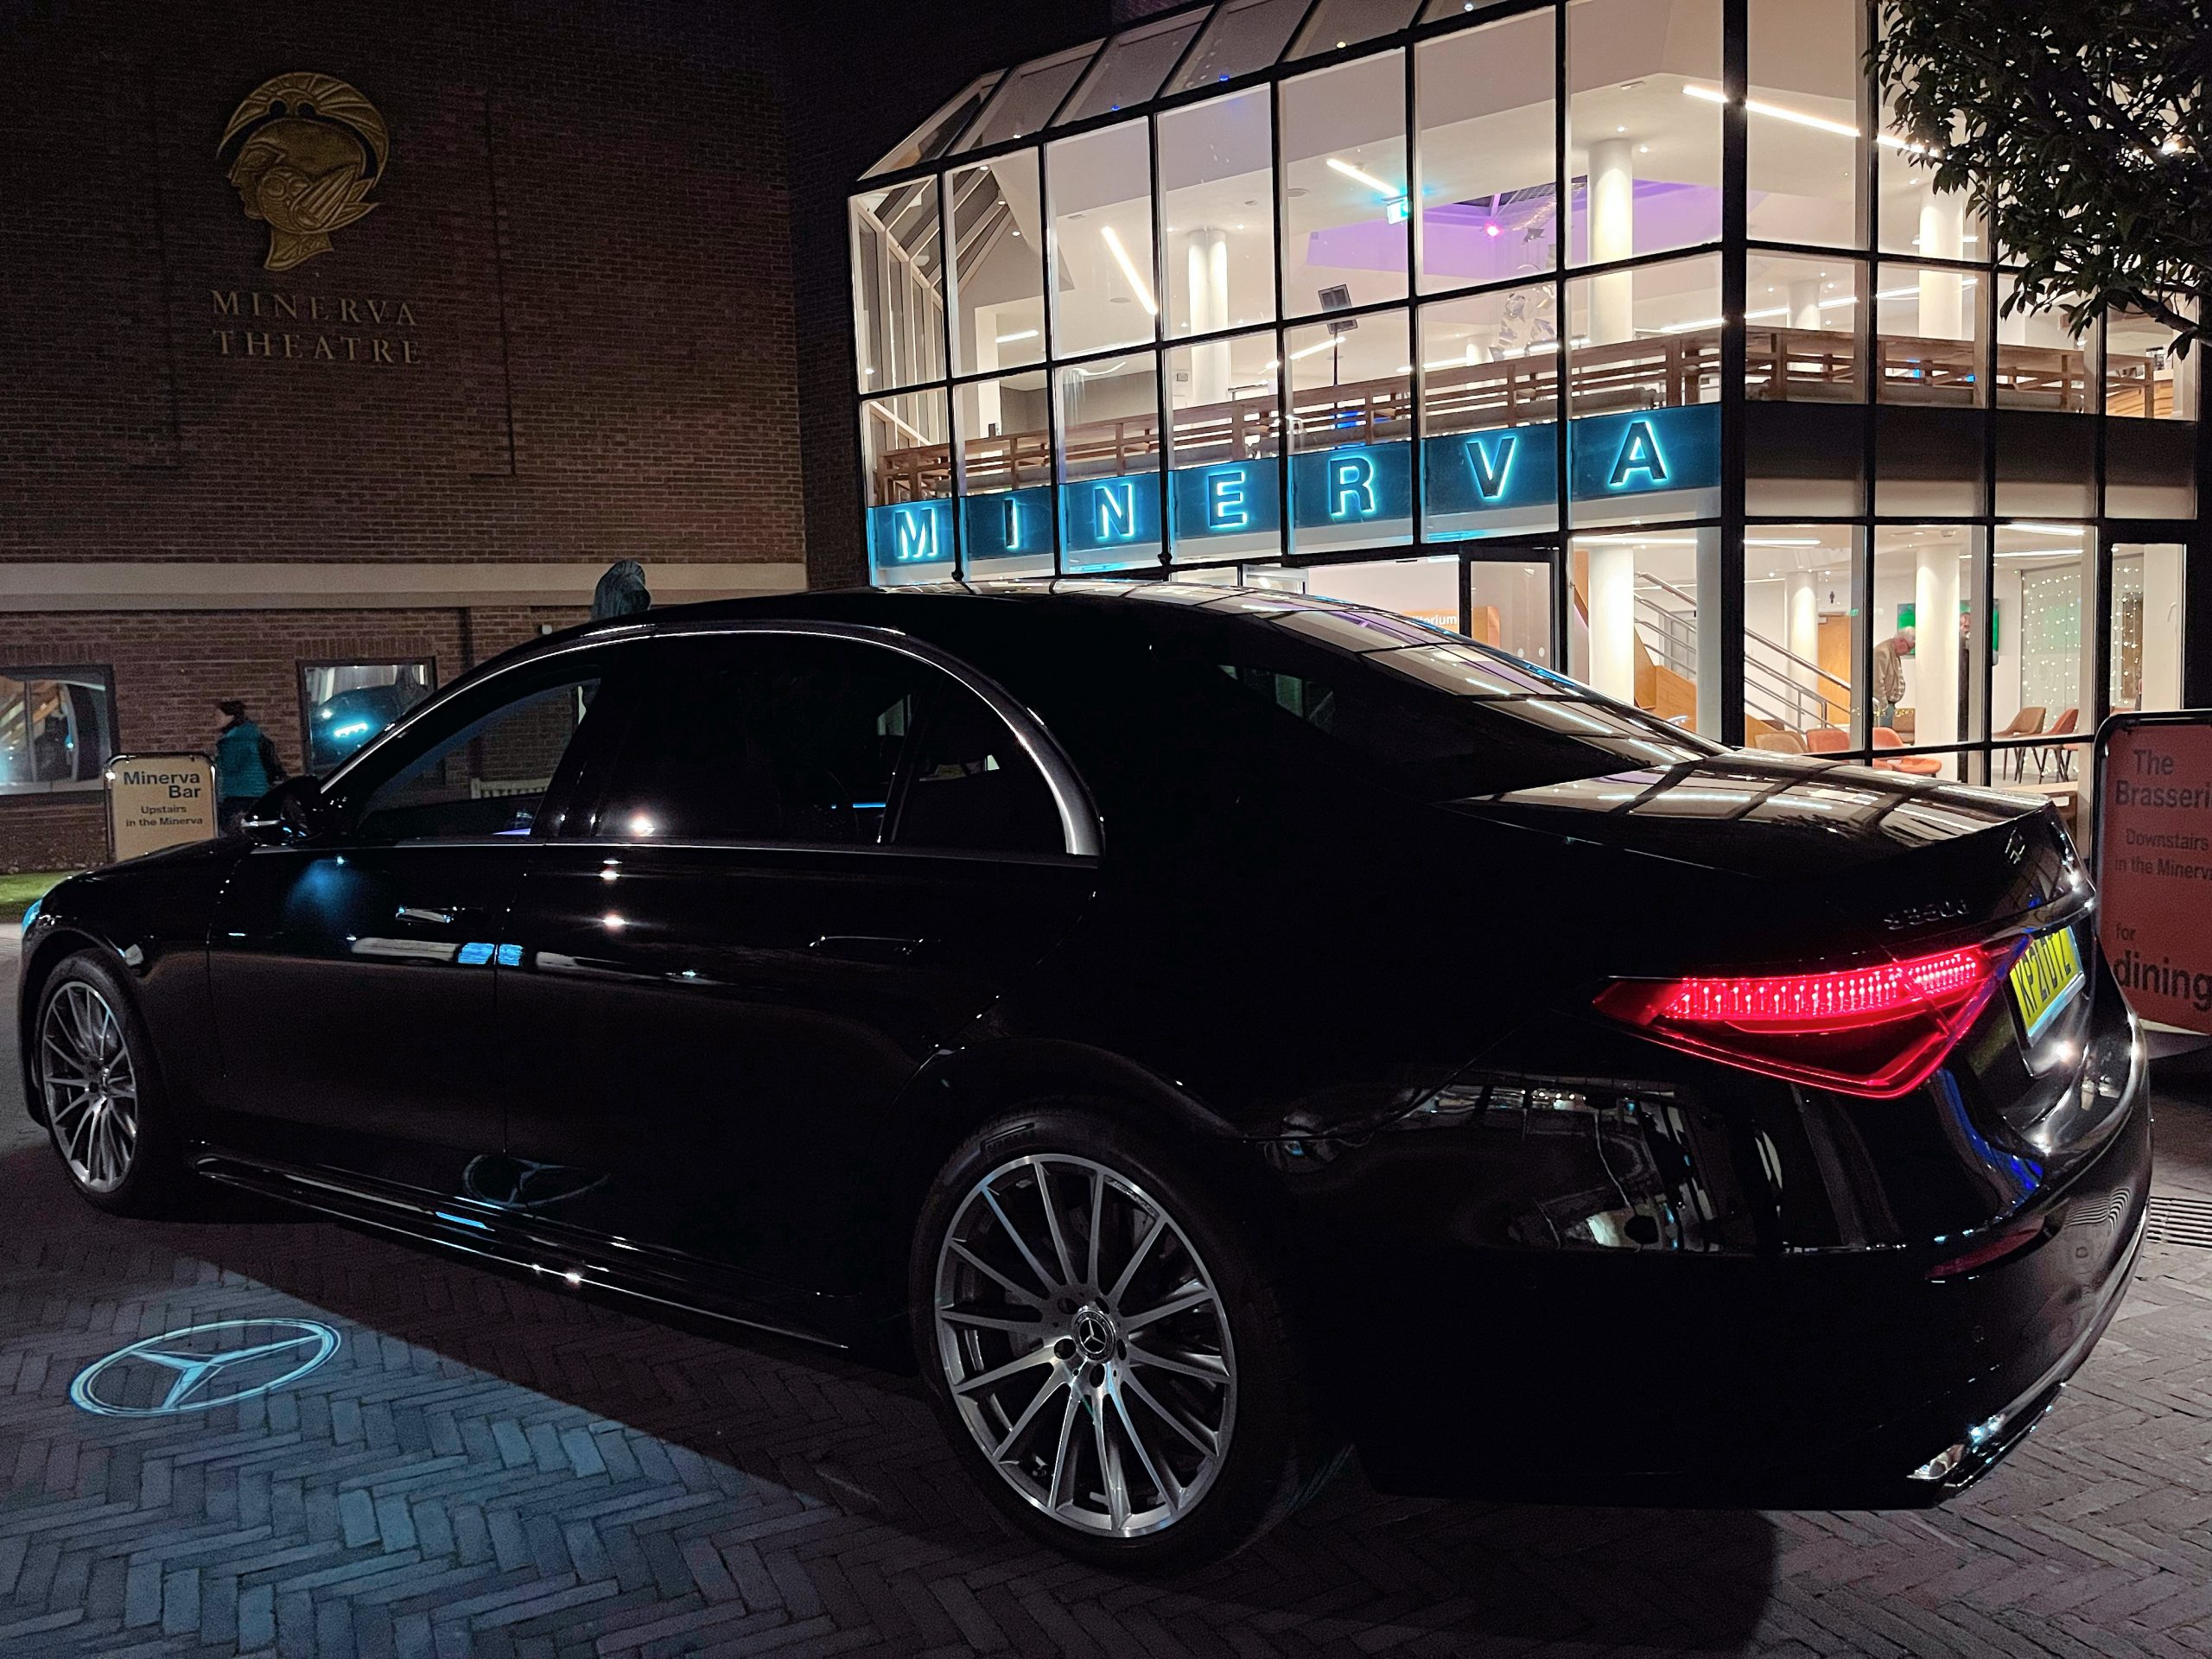 Wait and Return Chauffeured Services for Theatre Events throughout the UK. Book your car now at 01684 355012